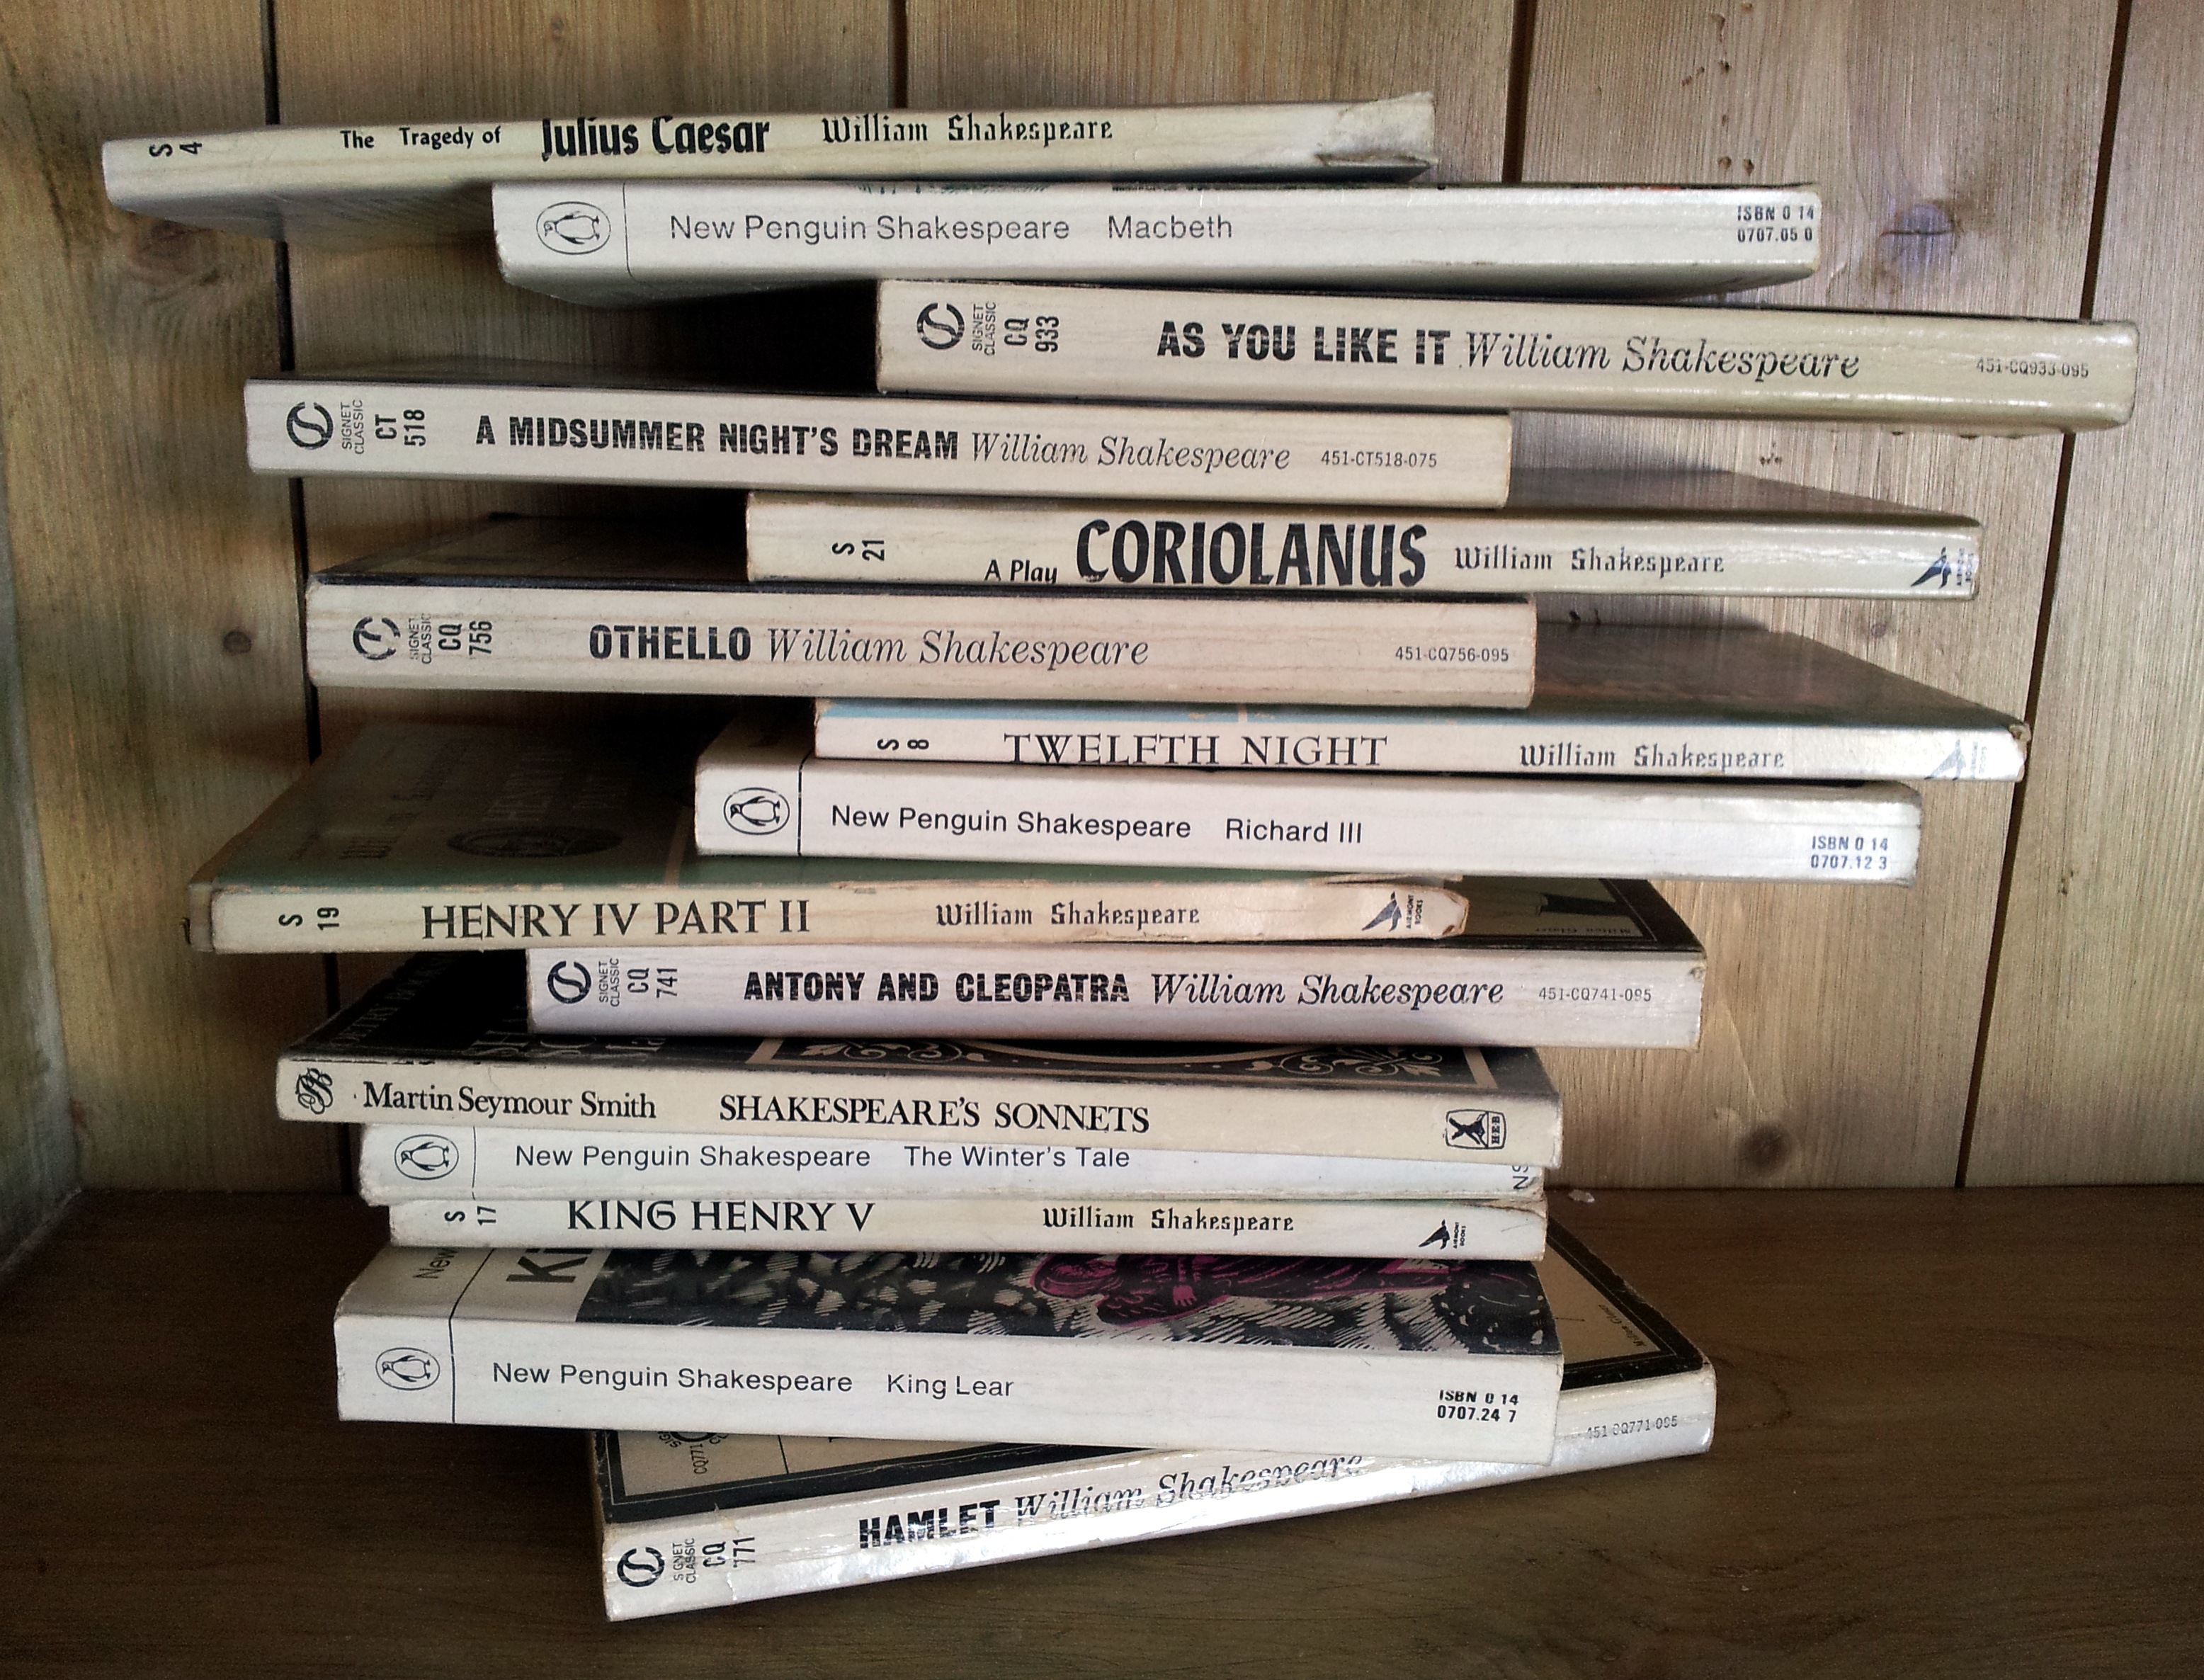 Pile of Shakespeare plays with the spines facing forward.